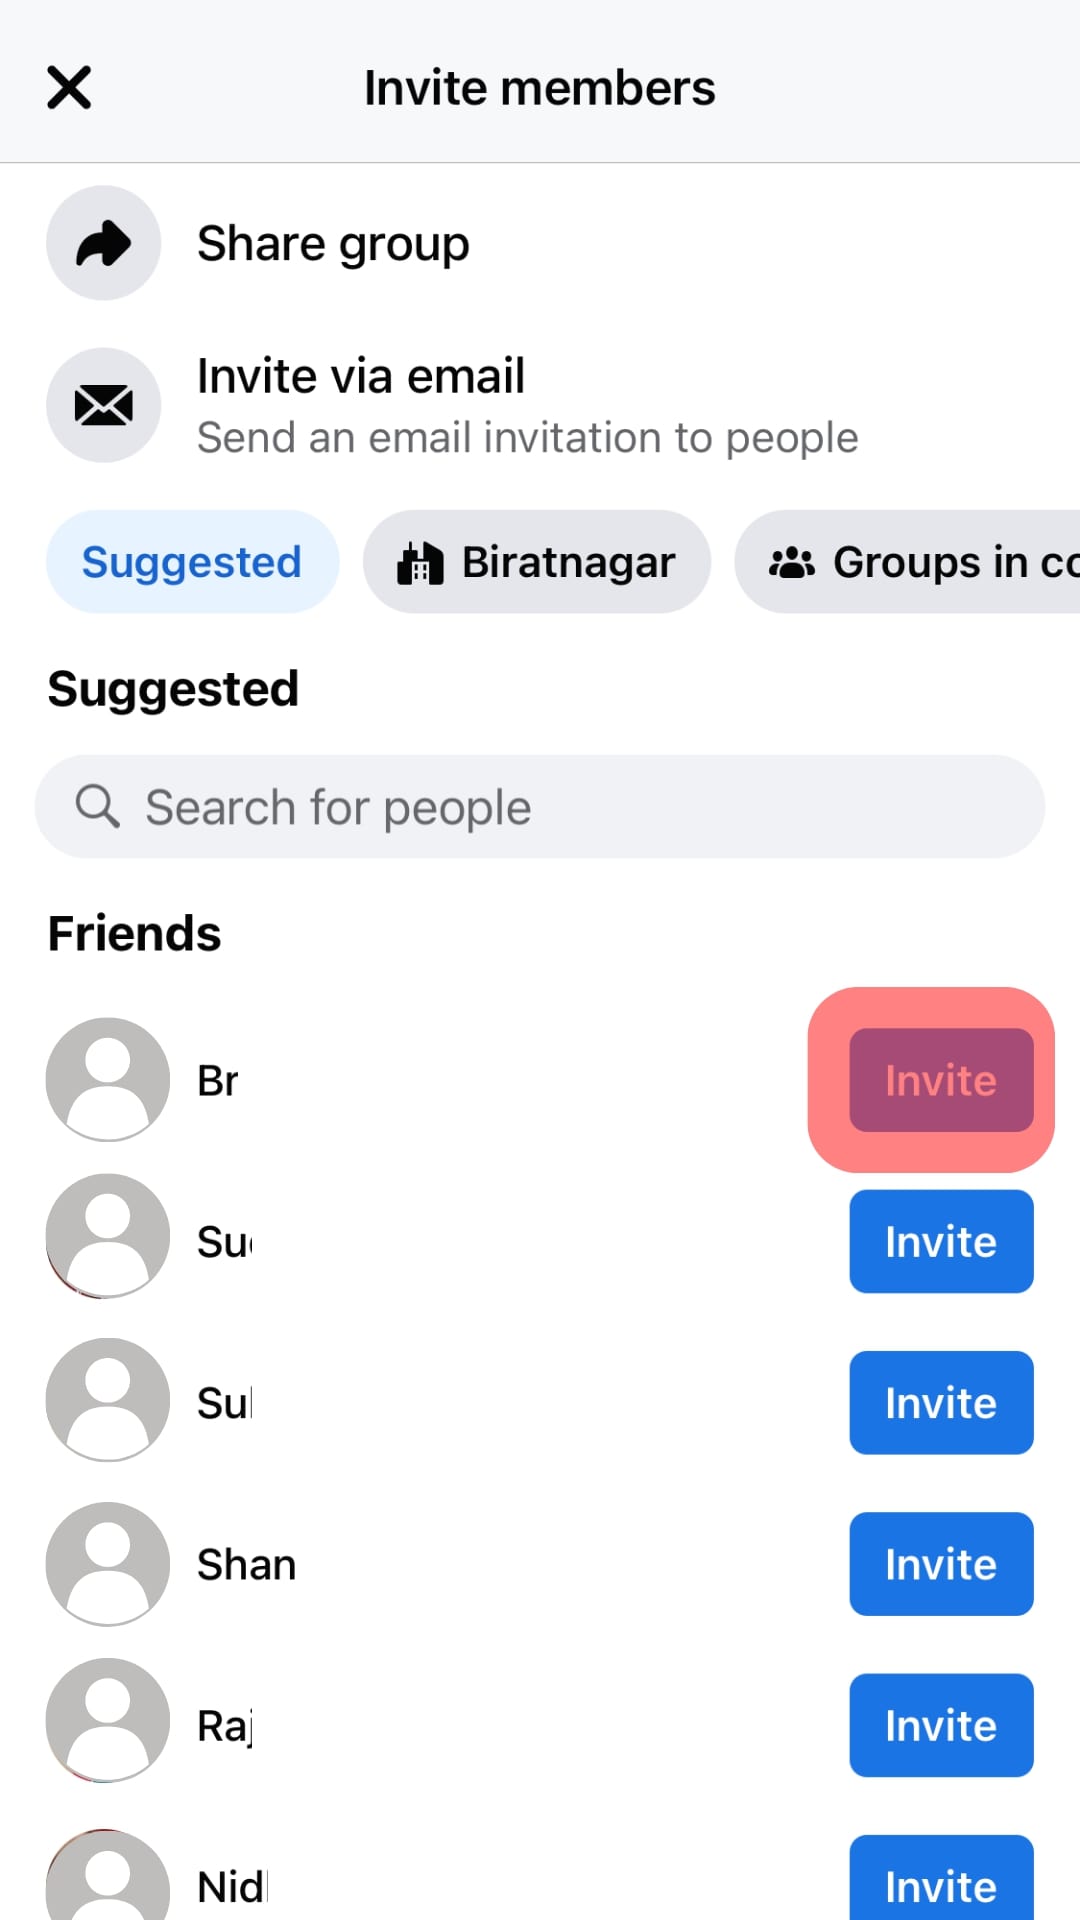 Tap Invite Next To The Names Of The People